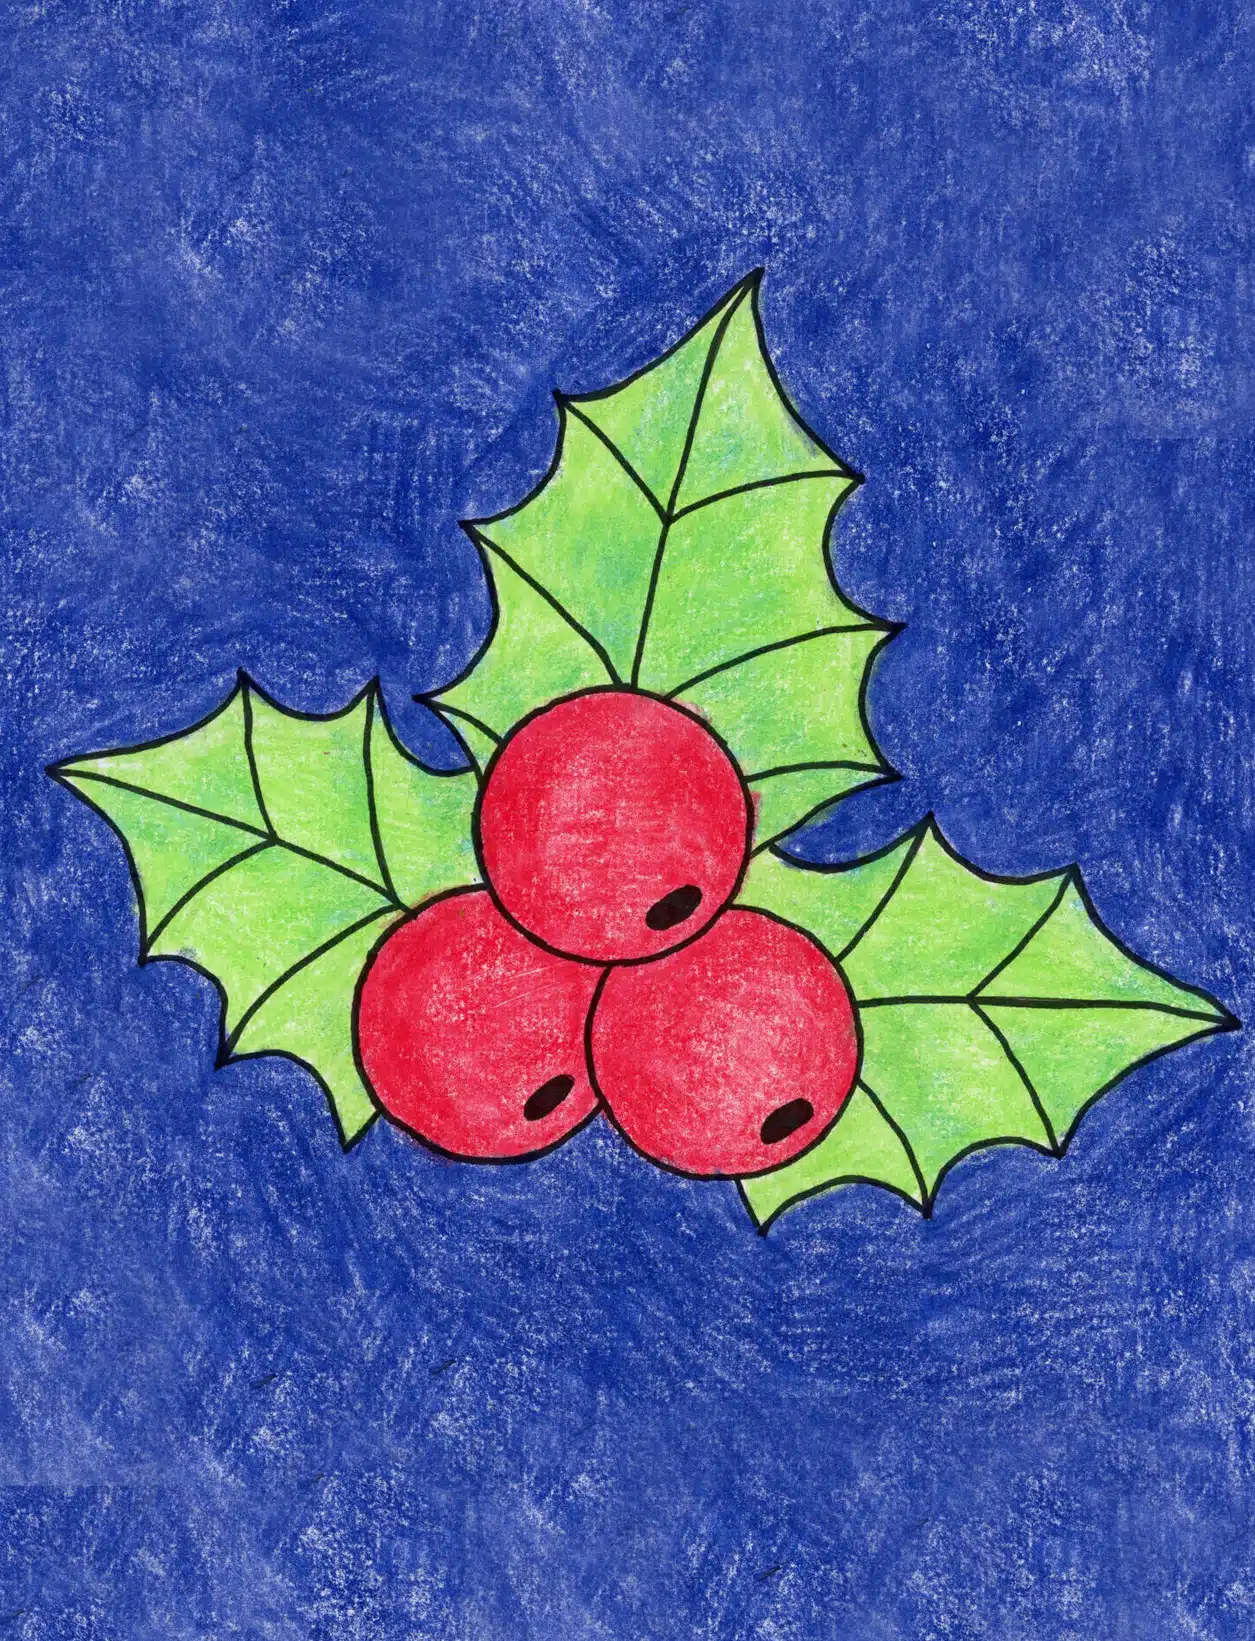 Easy How to Draw Mistletoe Tutorial and Mistletoe Coloring Page